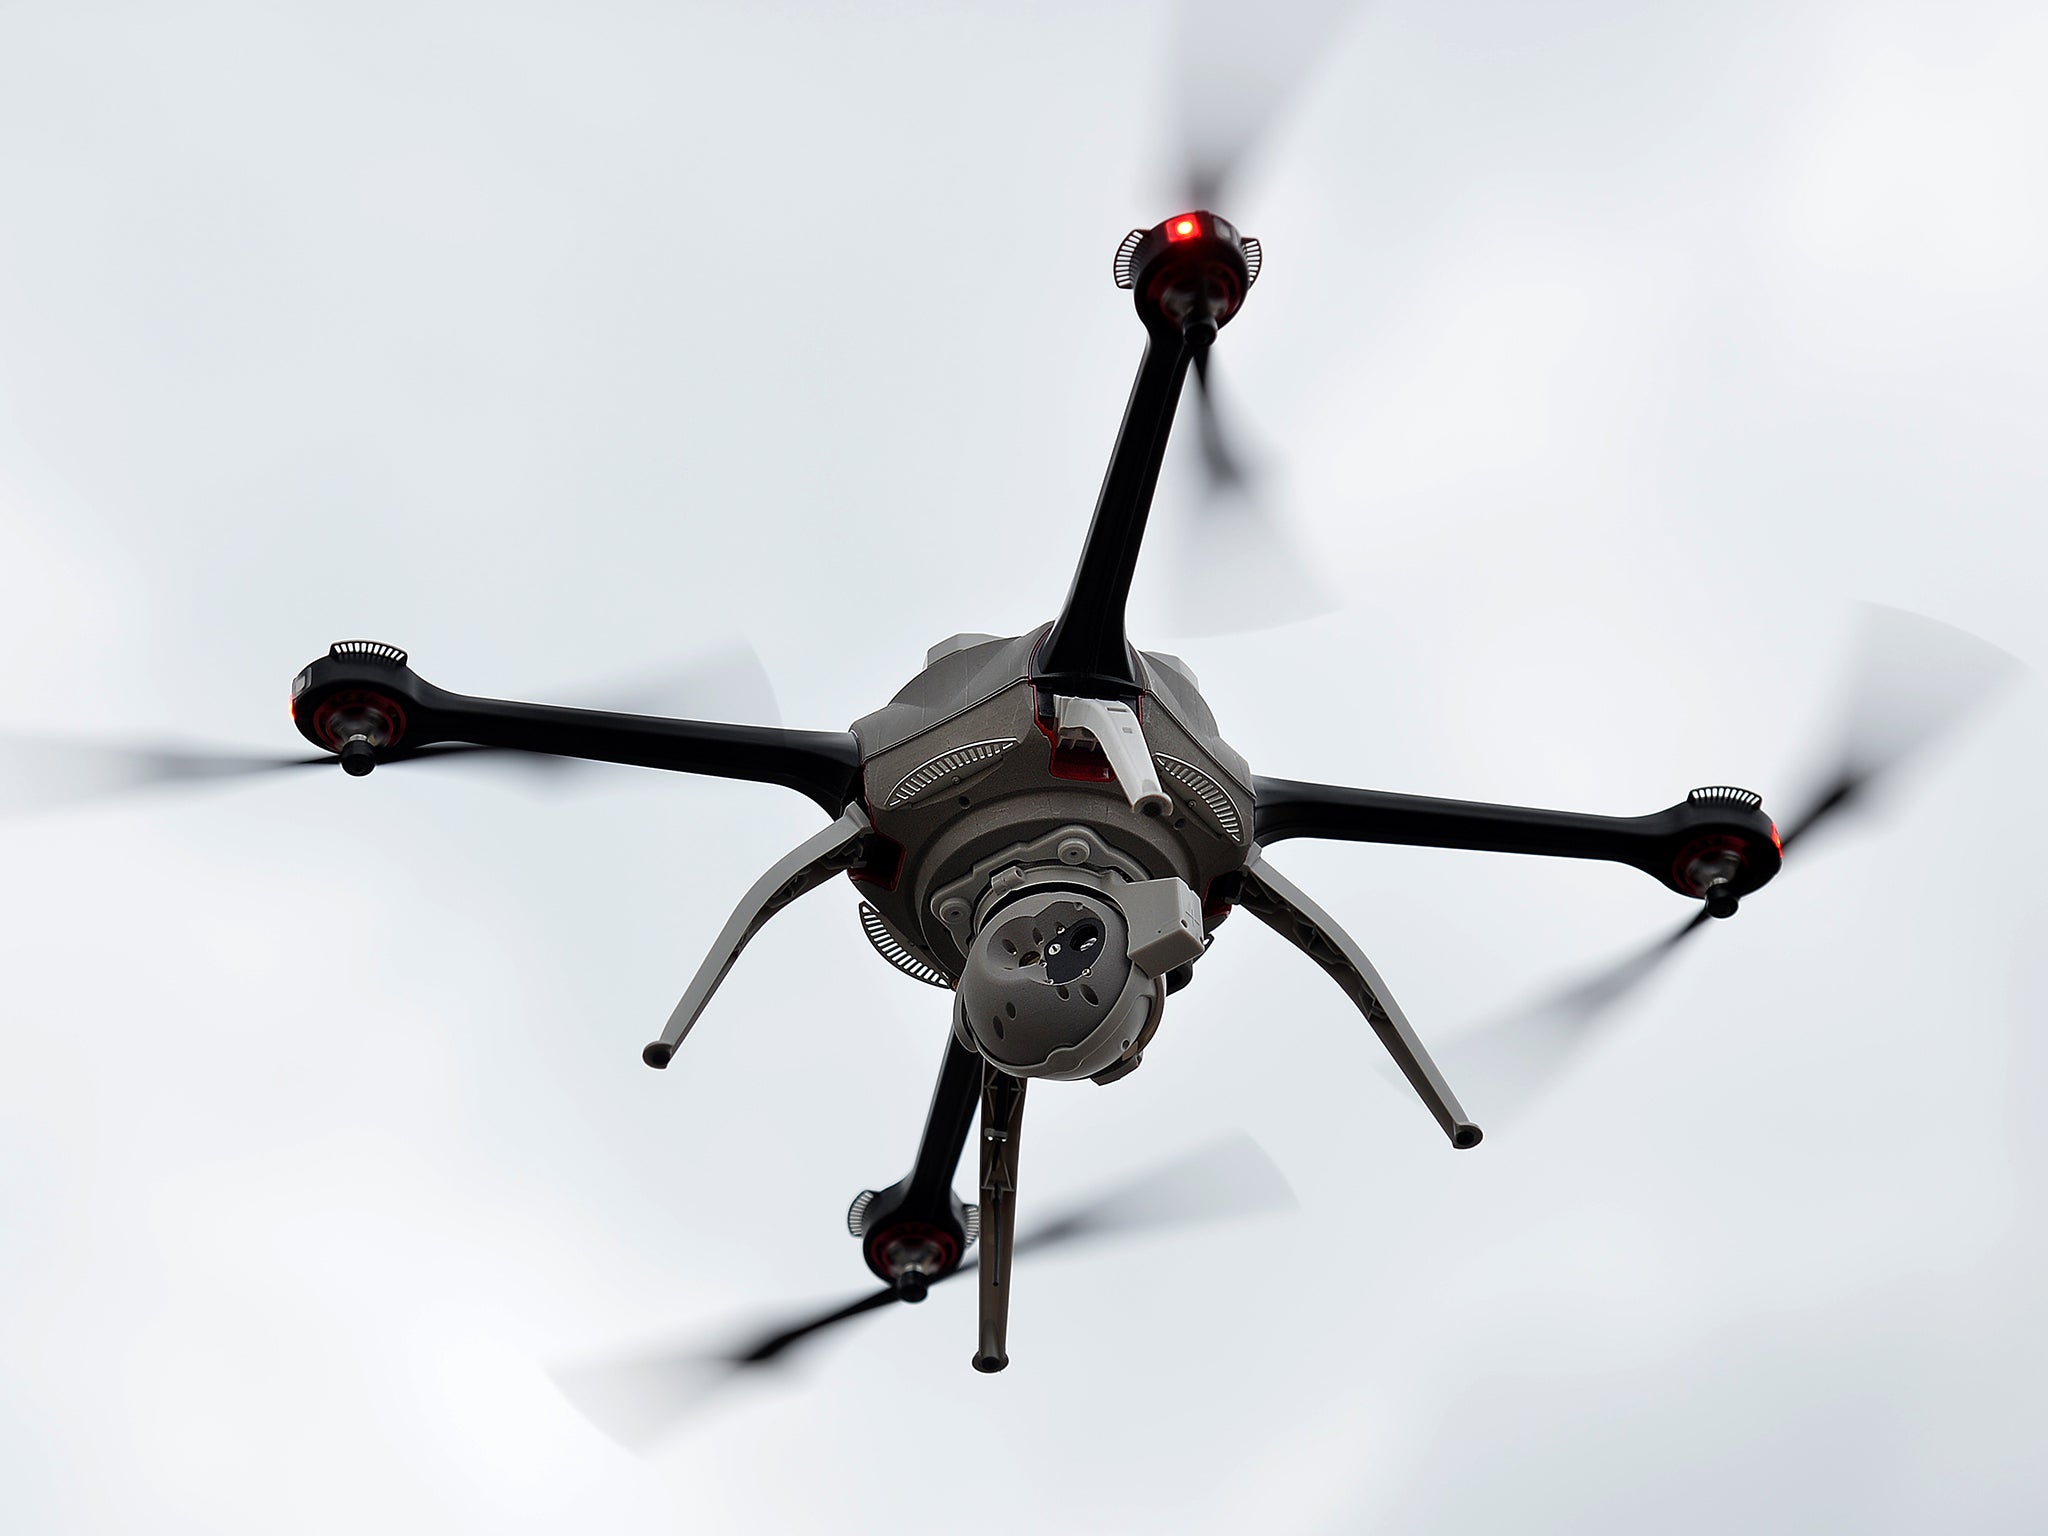 For the first time a list of drones used by government departments will be published